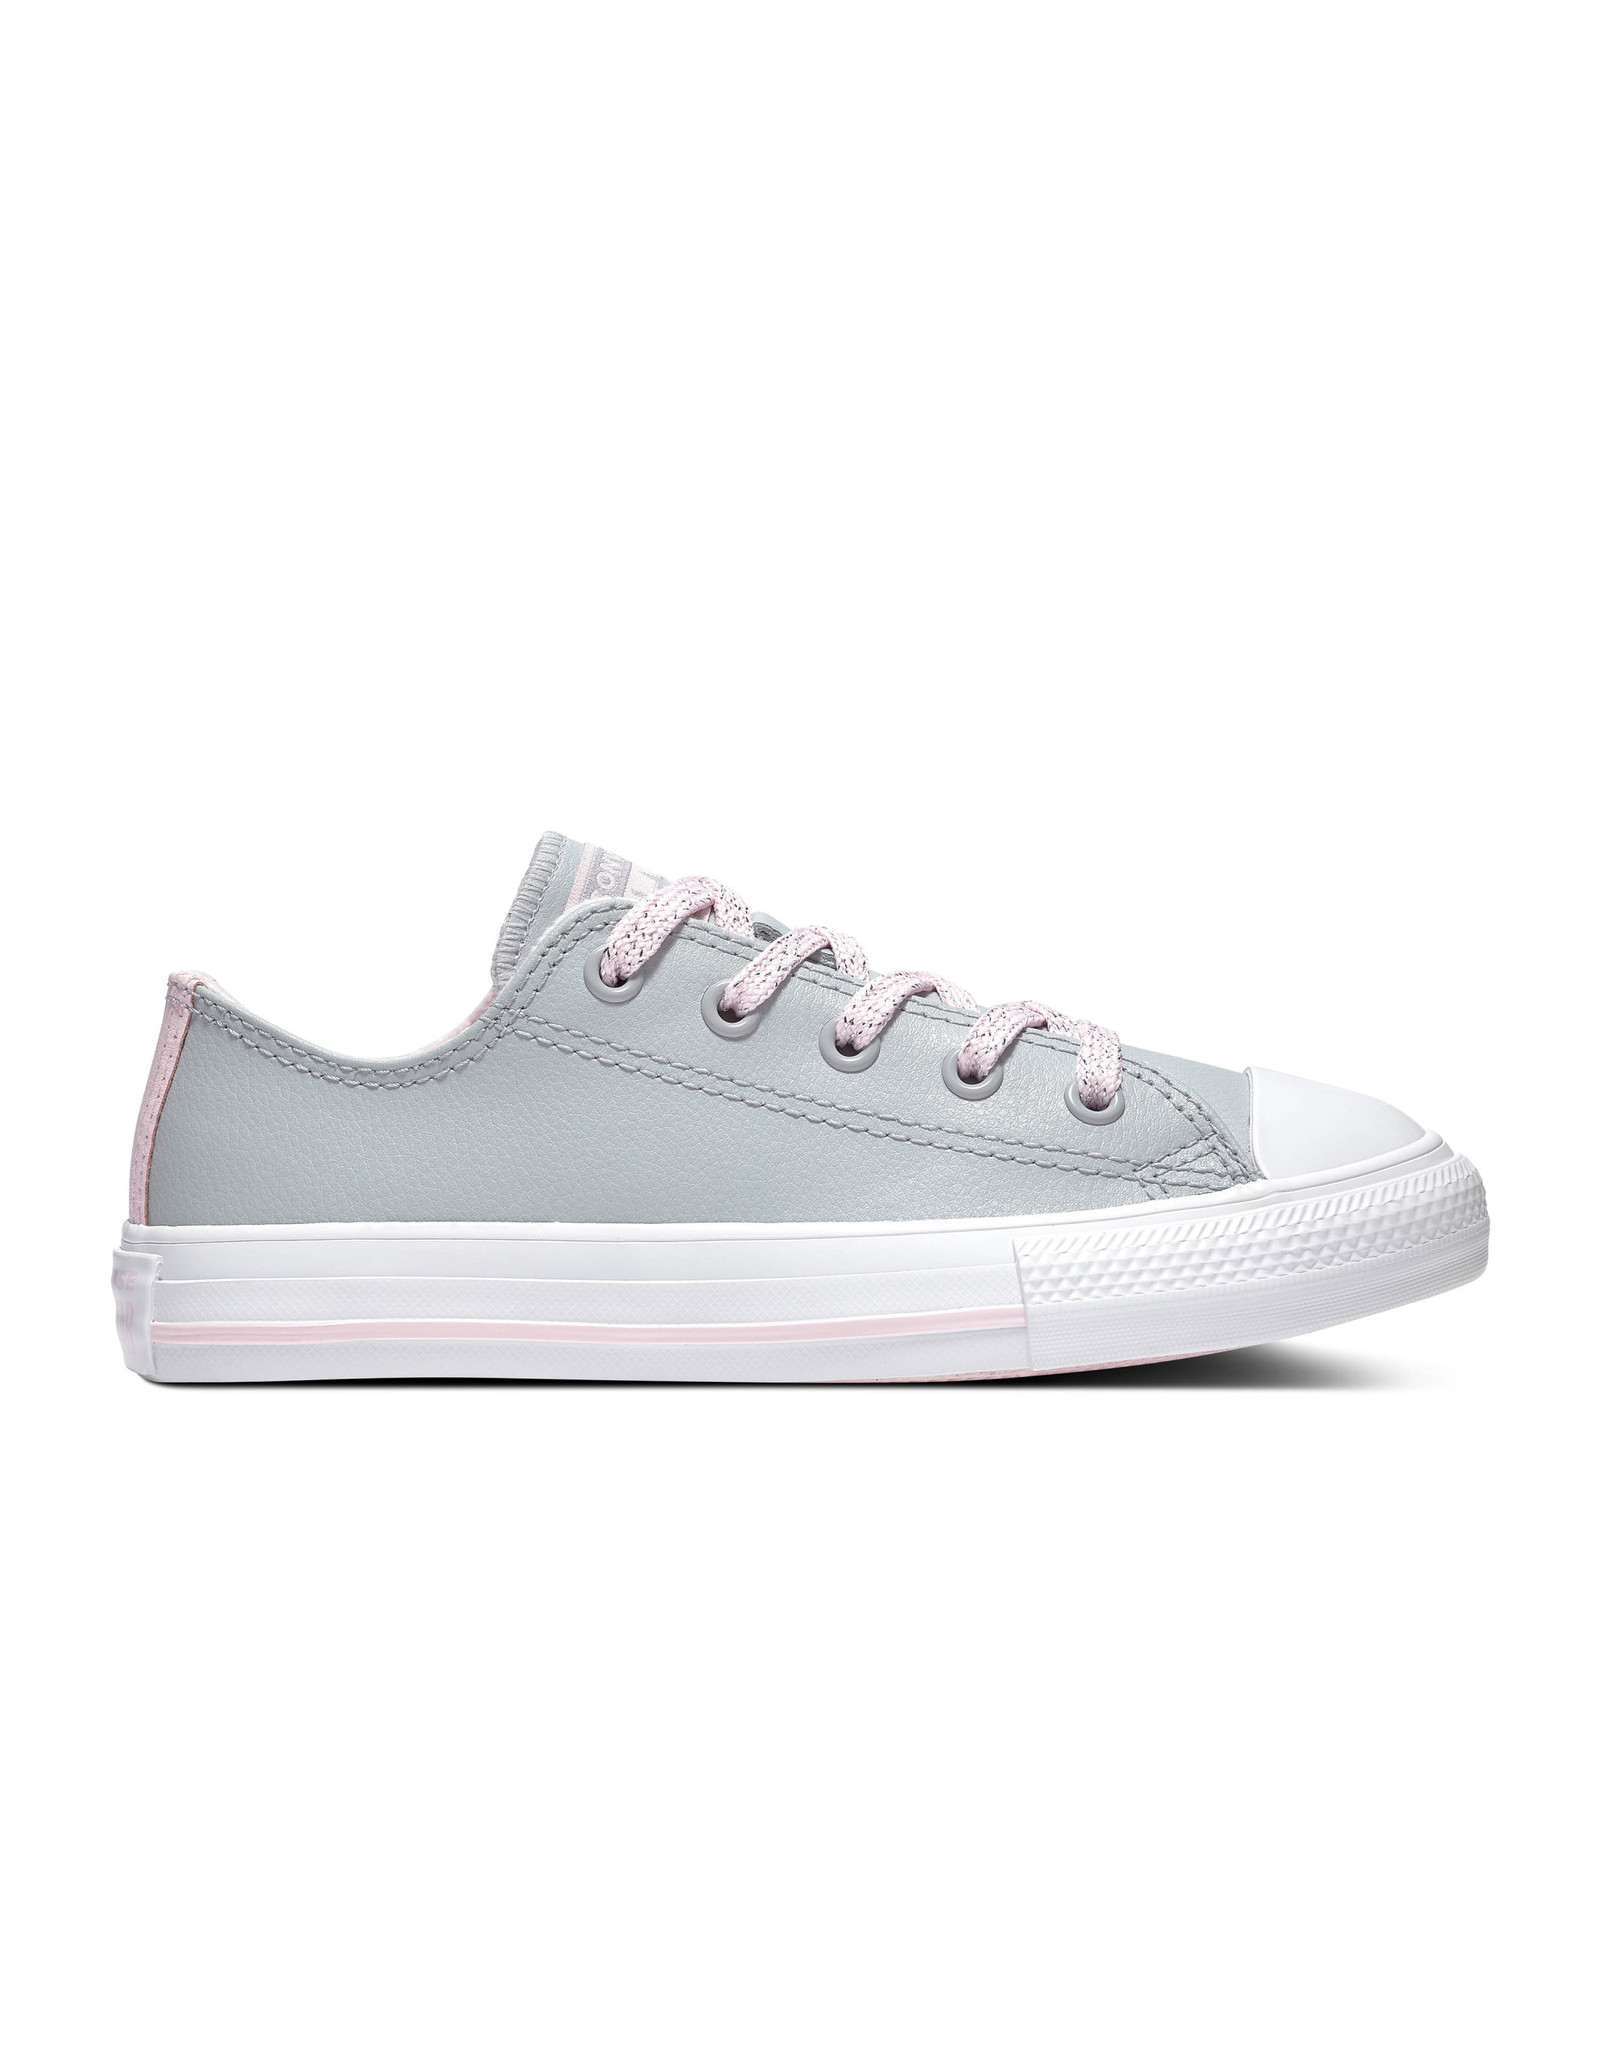 CHUCK TAYLOR ALL STAR OX WOLF LEATHER GREY/PINK FOAM/WHITE CCZWO-666195C